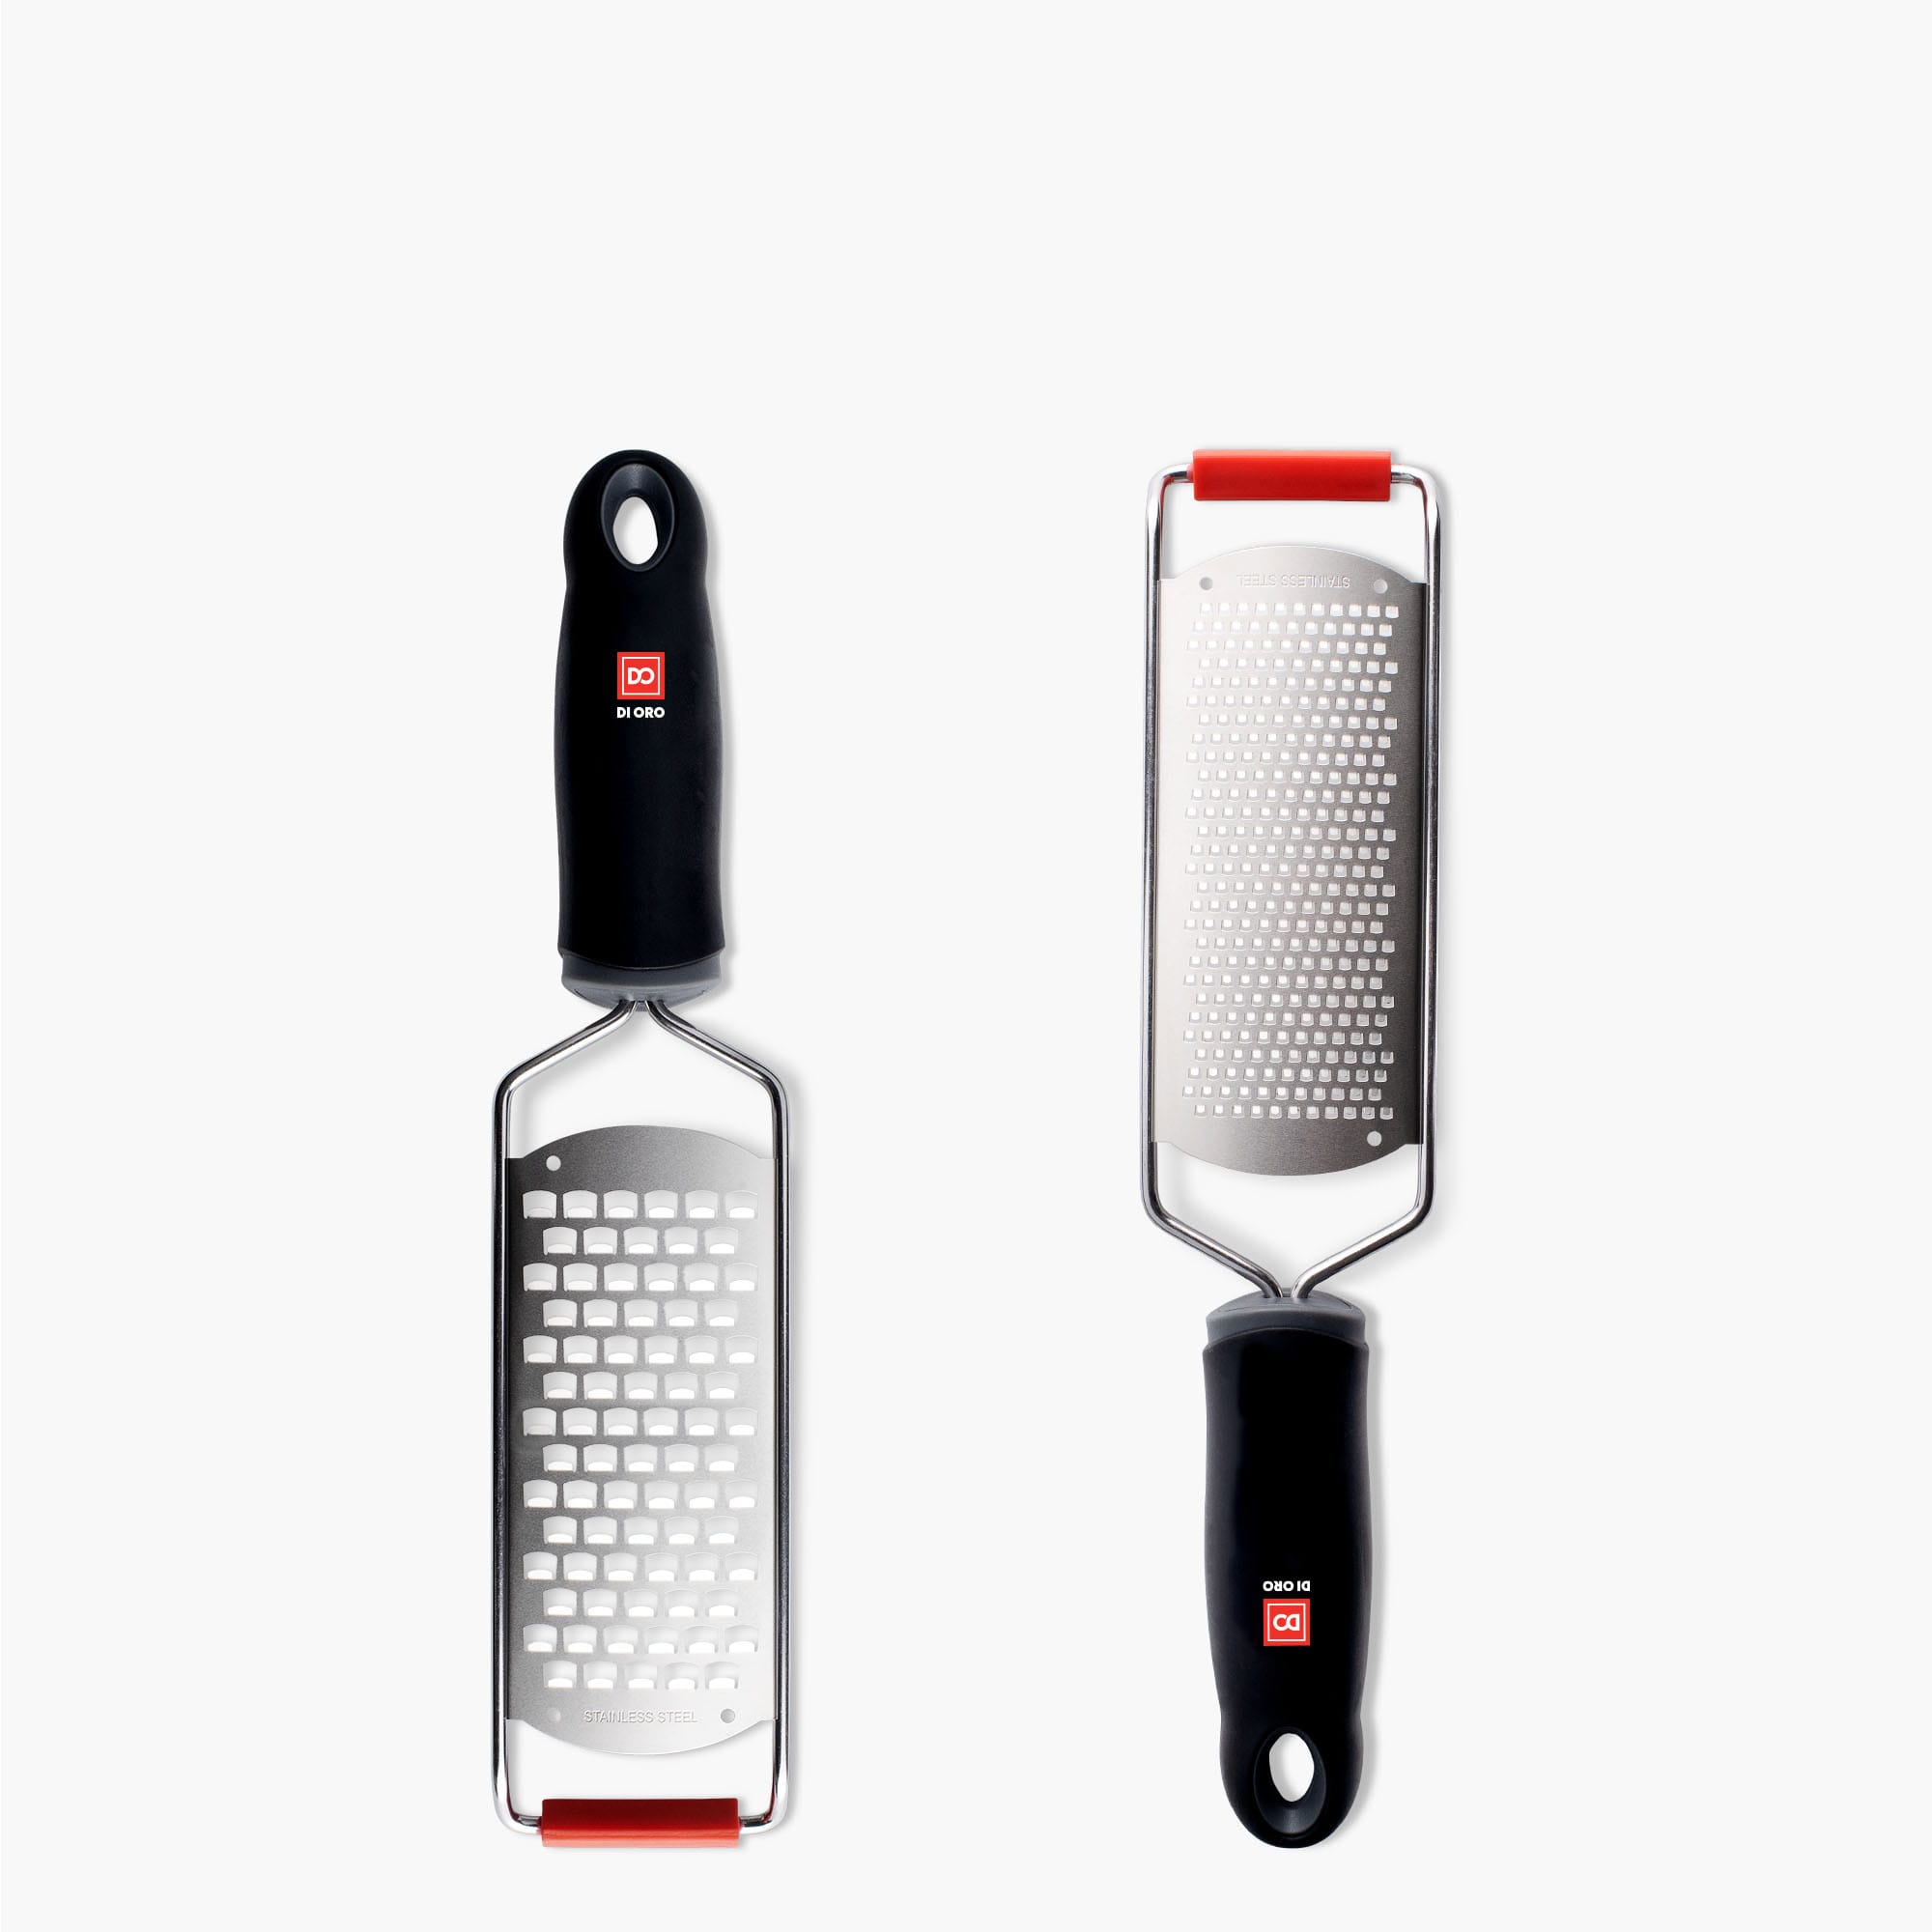 Cheese Grater Lemon Zester Set of 2, ISZW Zester Grater with